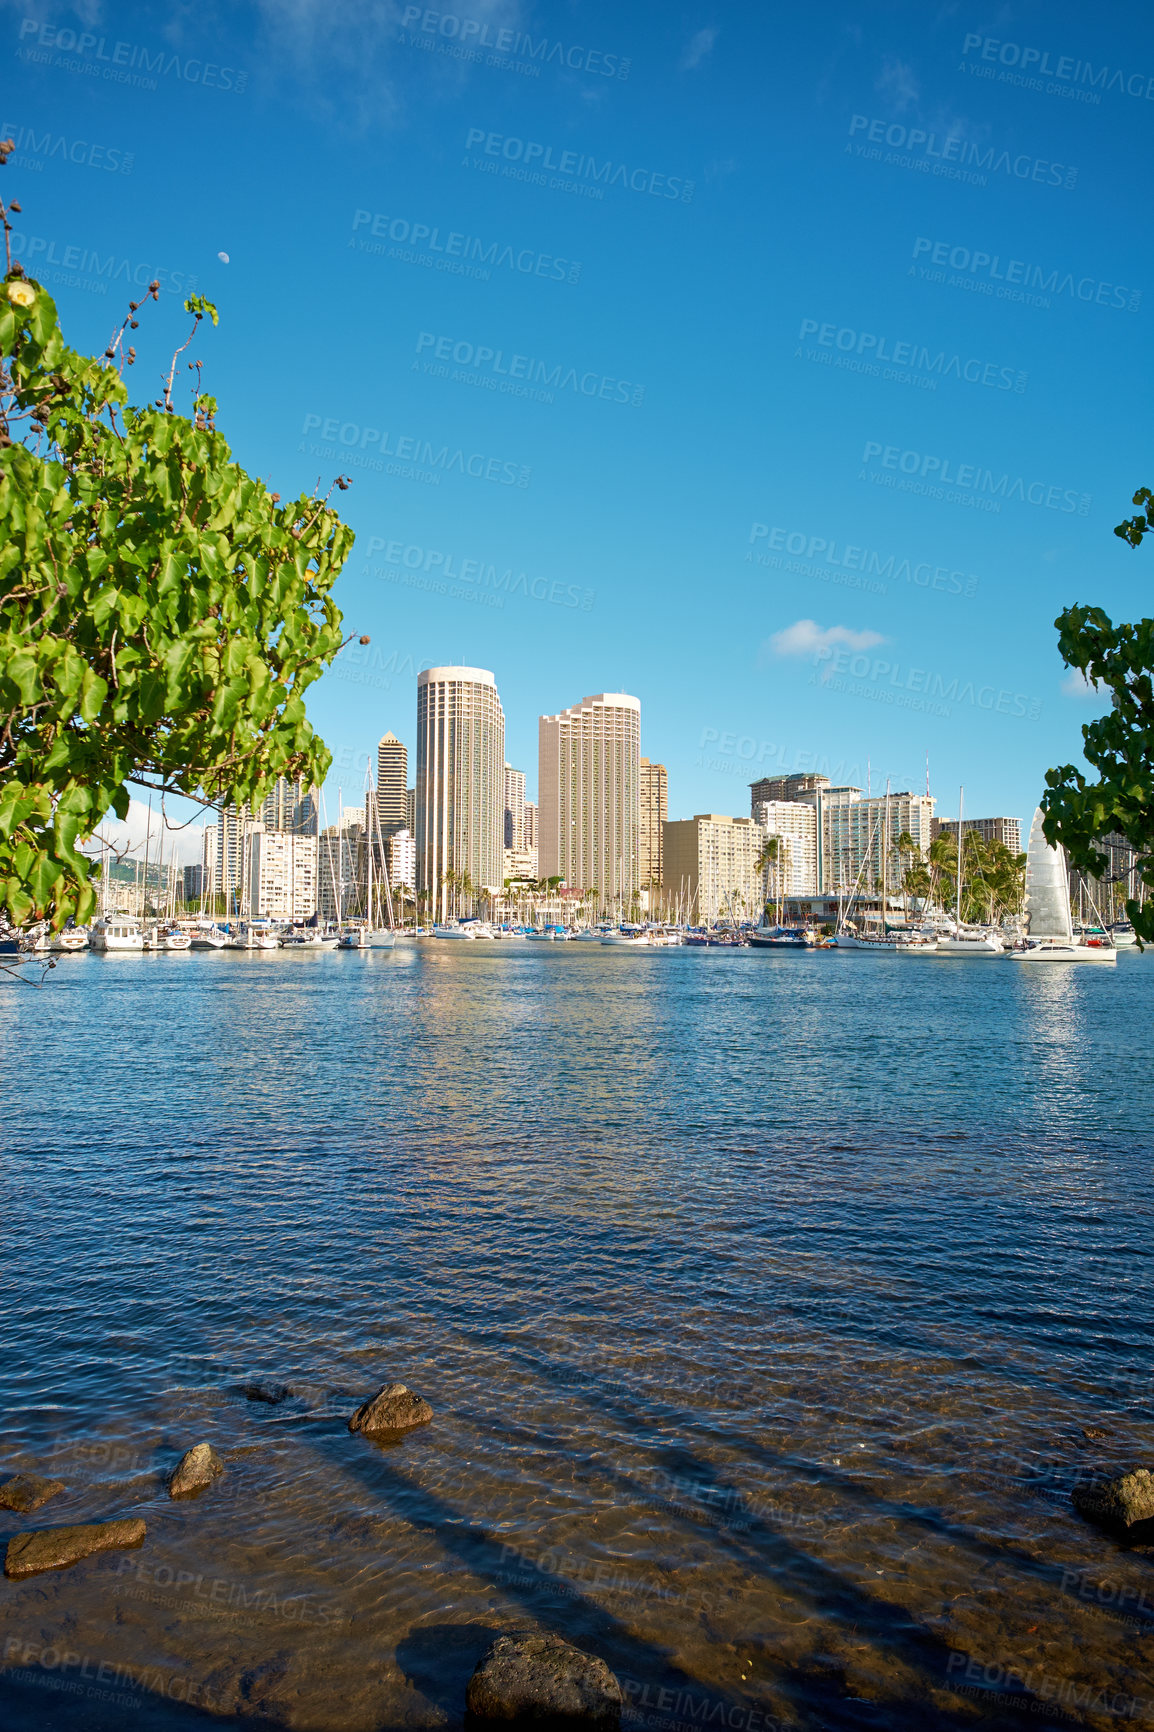 Buy stock photo Apartments or business district beside a lagoon beach on a sunny day with a cloudy blue sky in Waikiki. A popular summer vacation tourist location in Oahu, Hawaii. Luxury resort by the ocean in USA